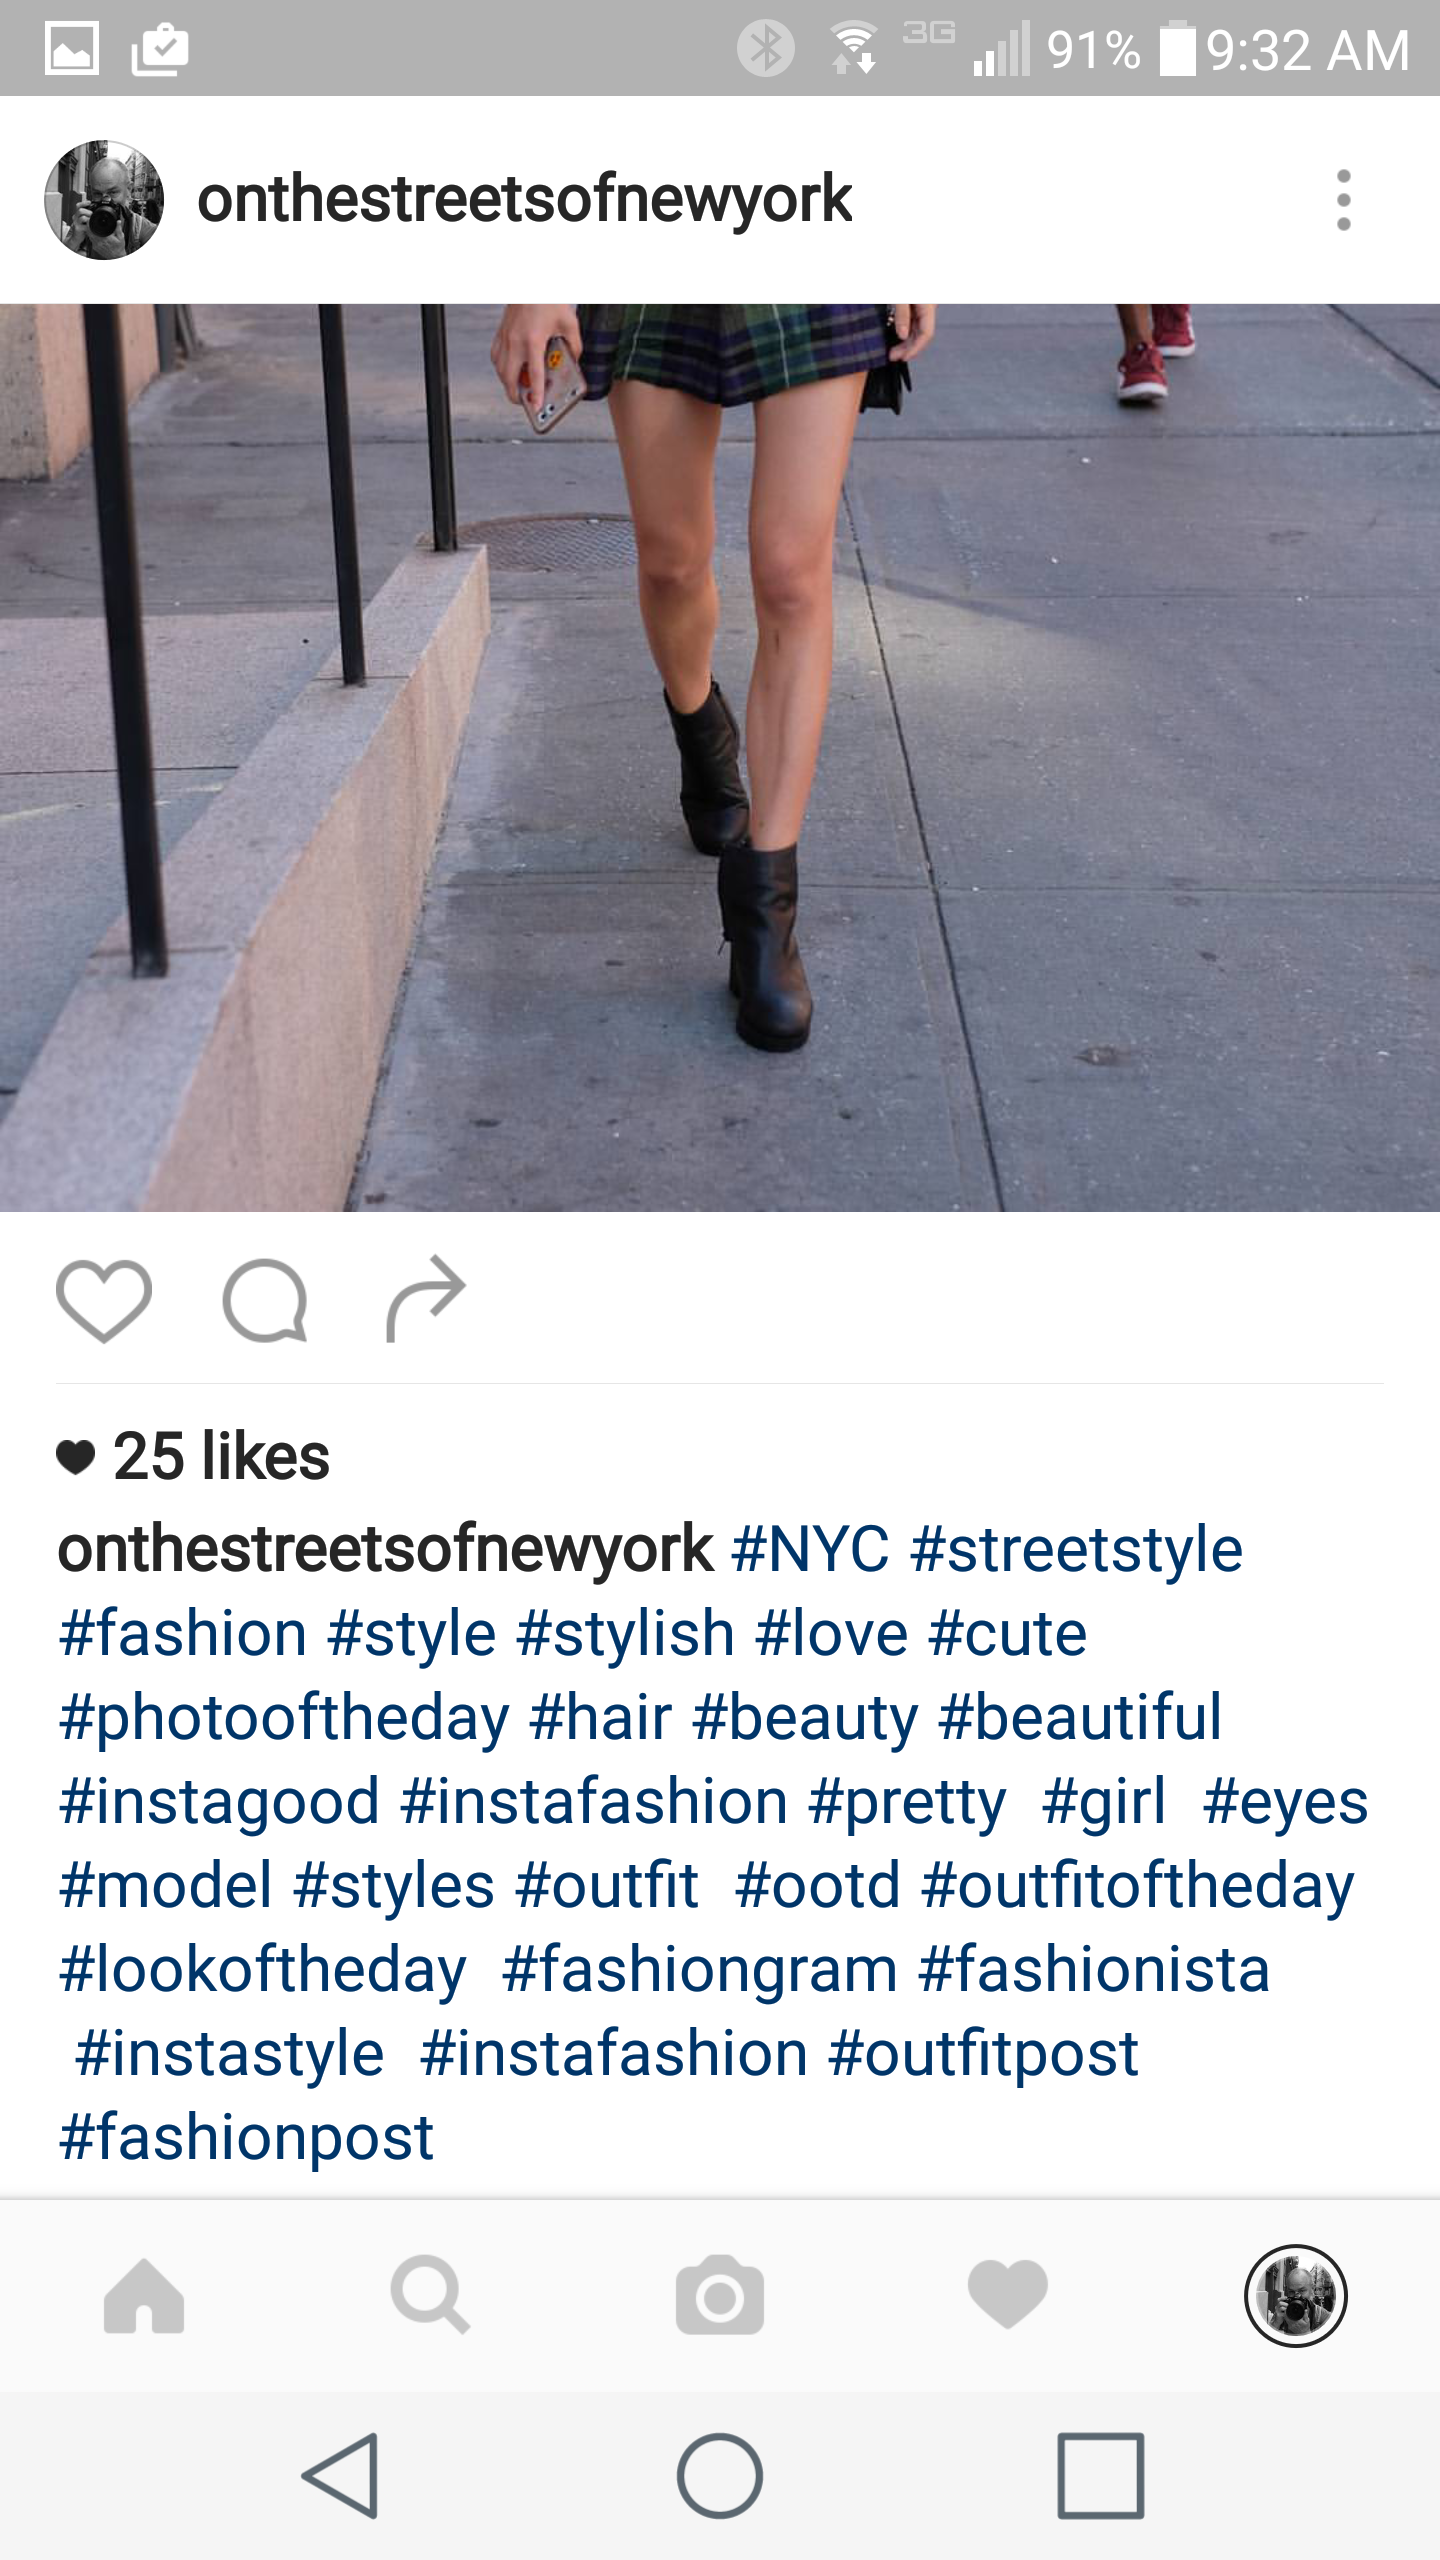 screenshot of an Instagram post with hashtags